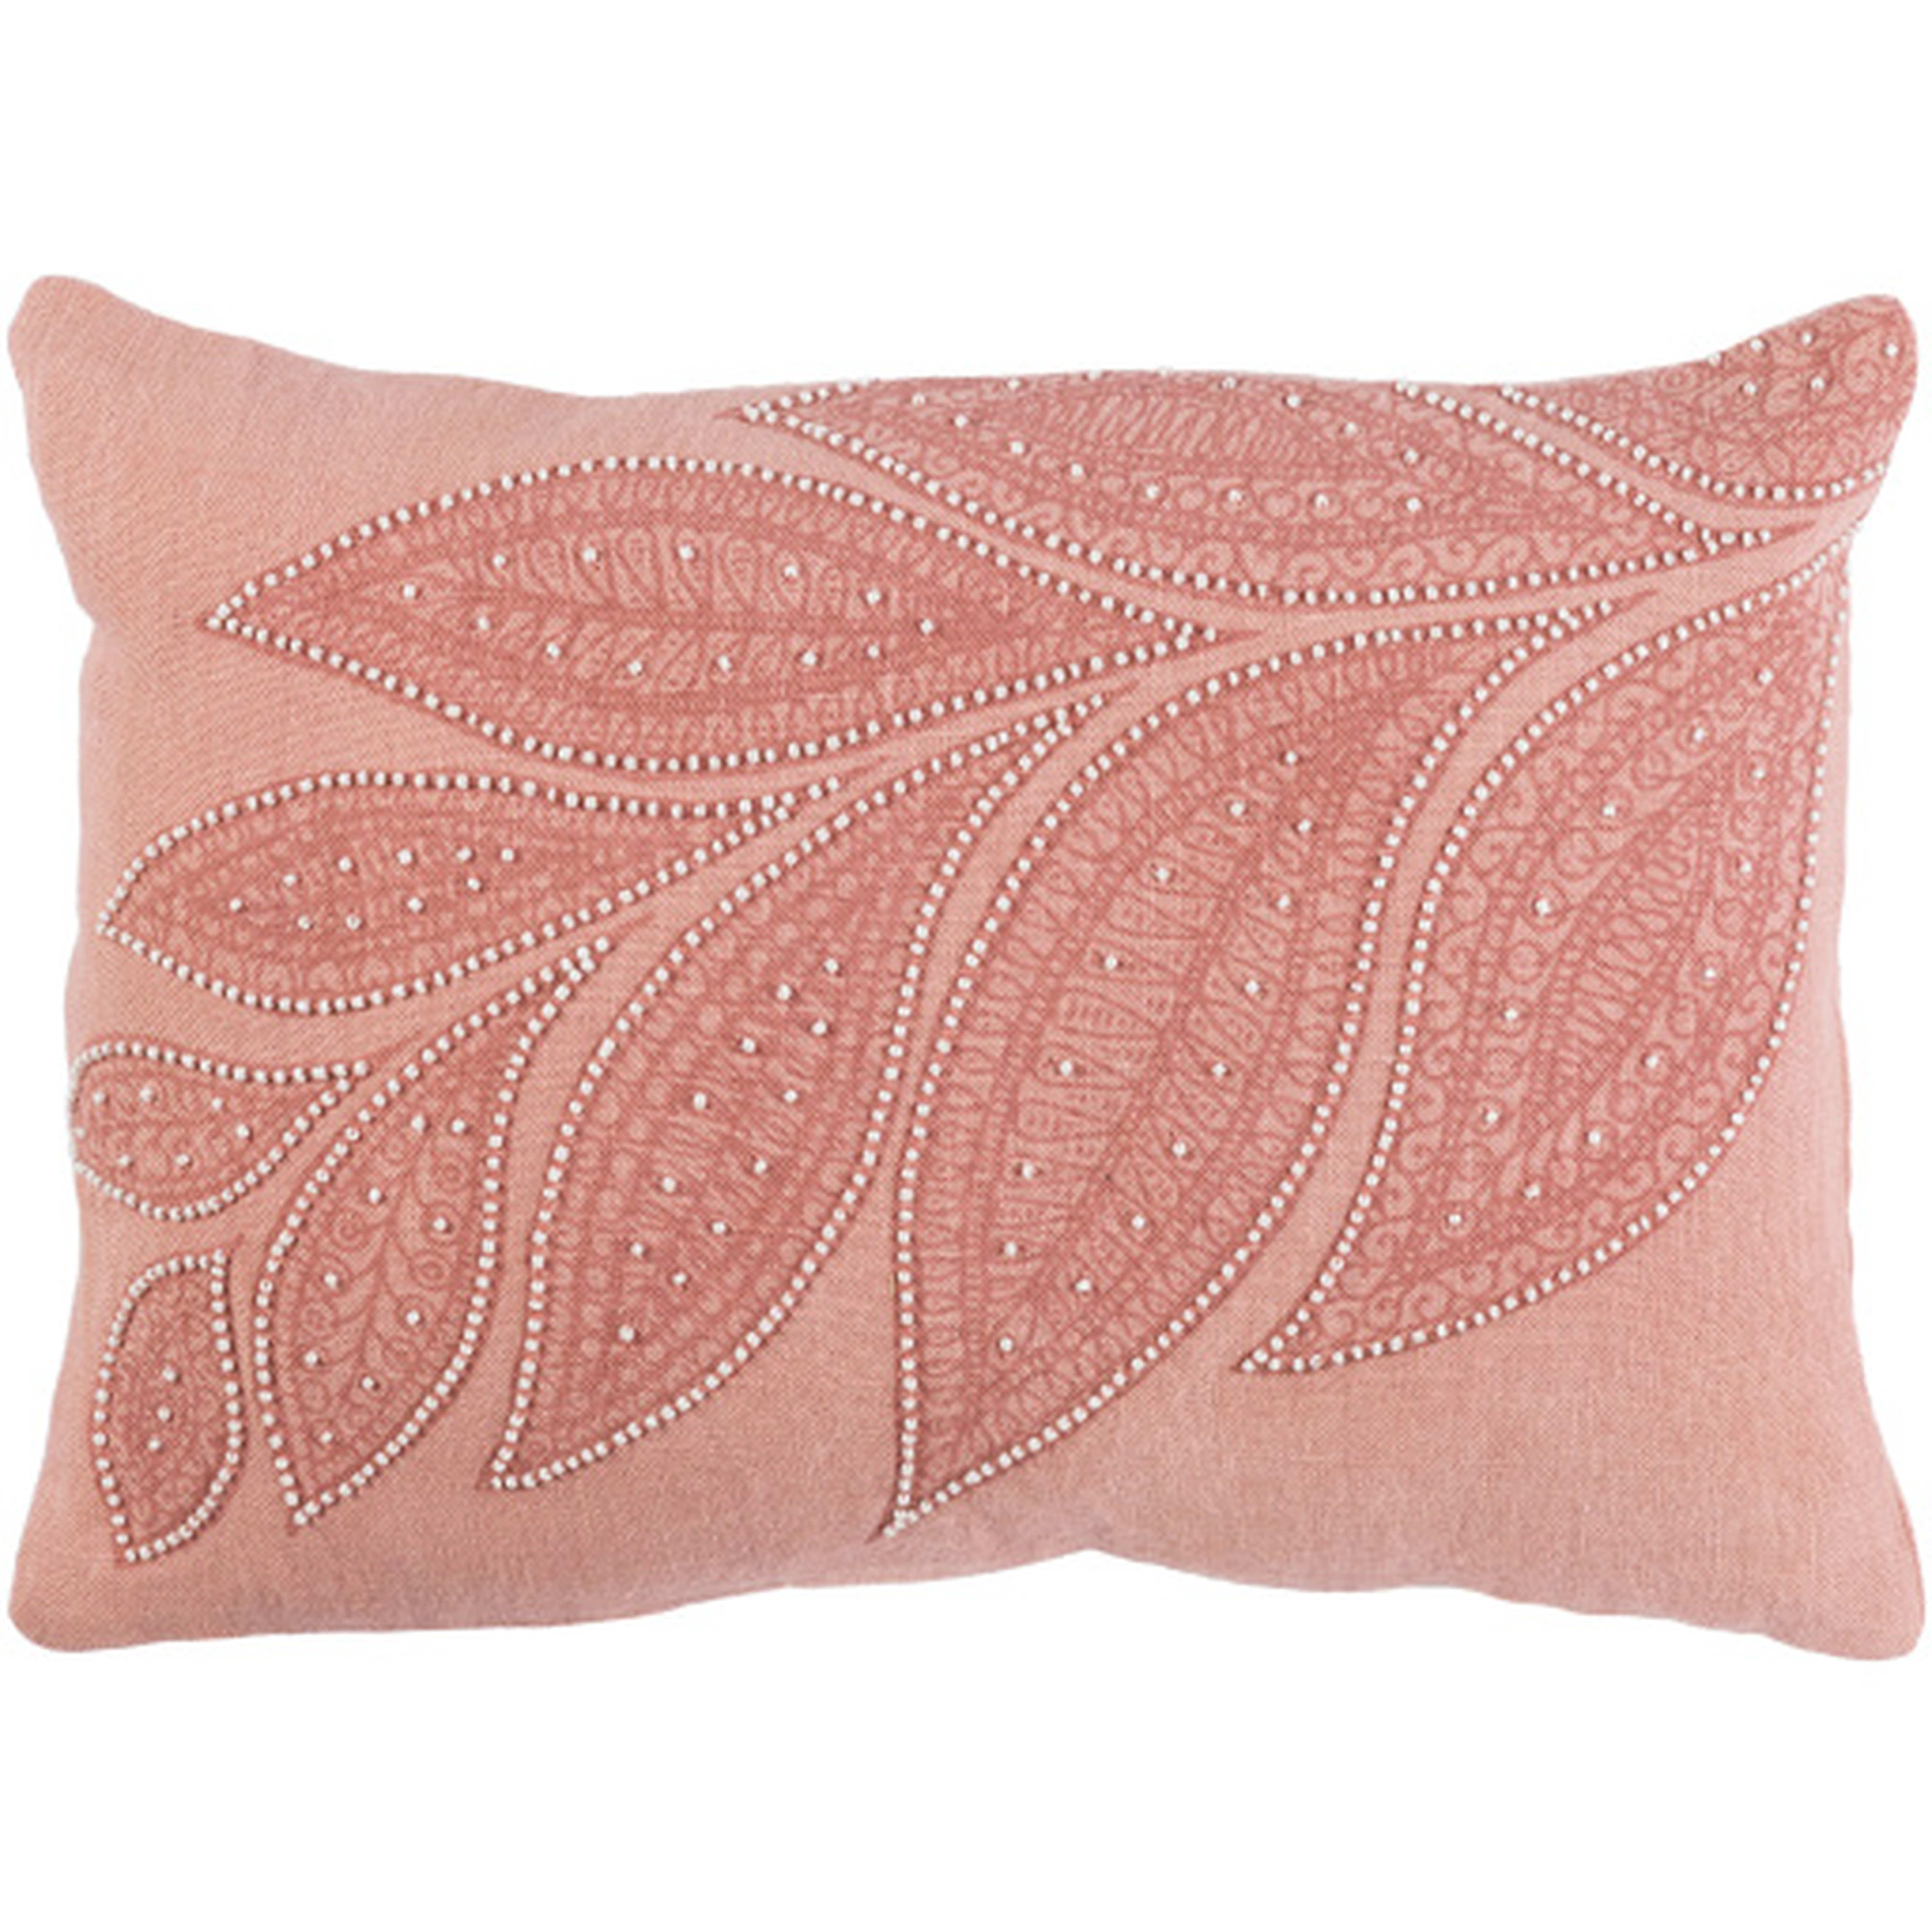 Tansy - TSY-003 - 18" x 18" - pillow cover only - Surya